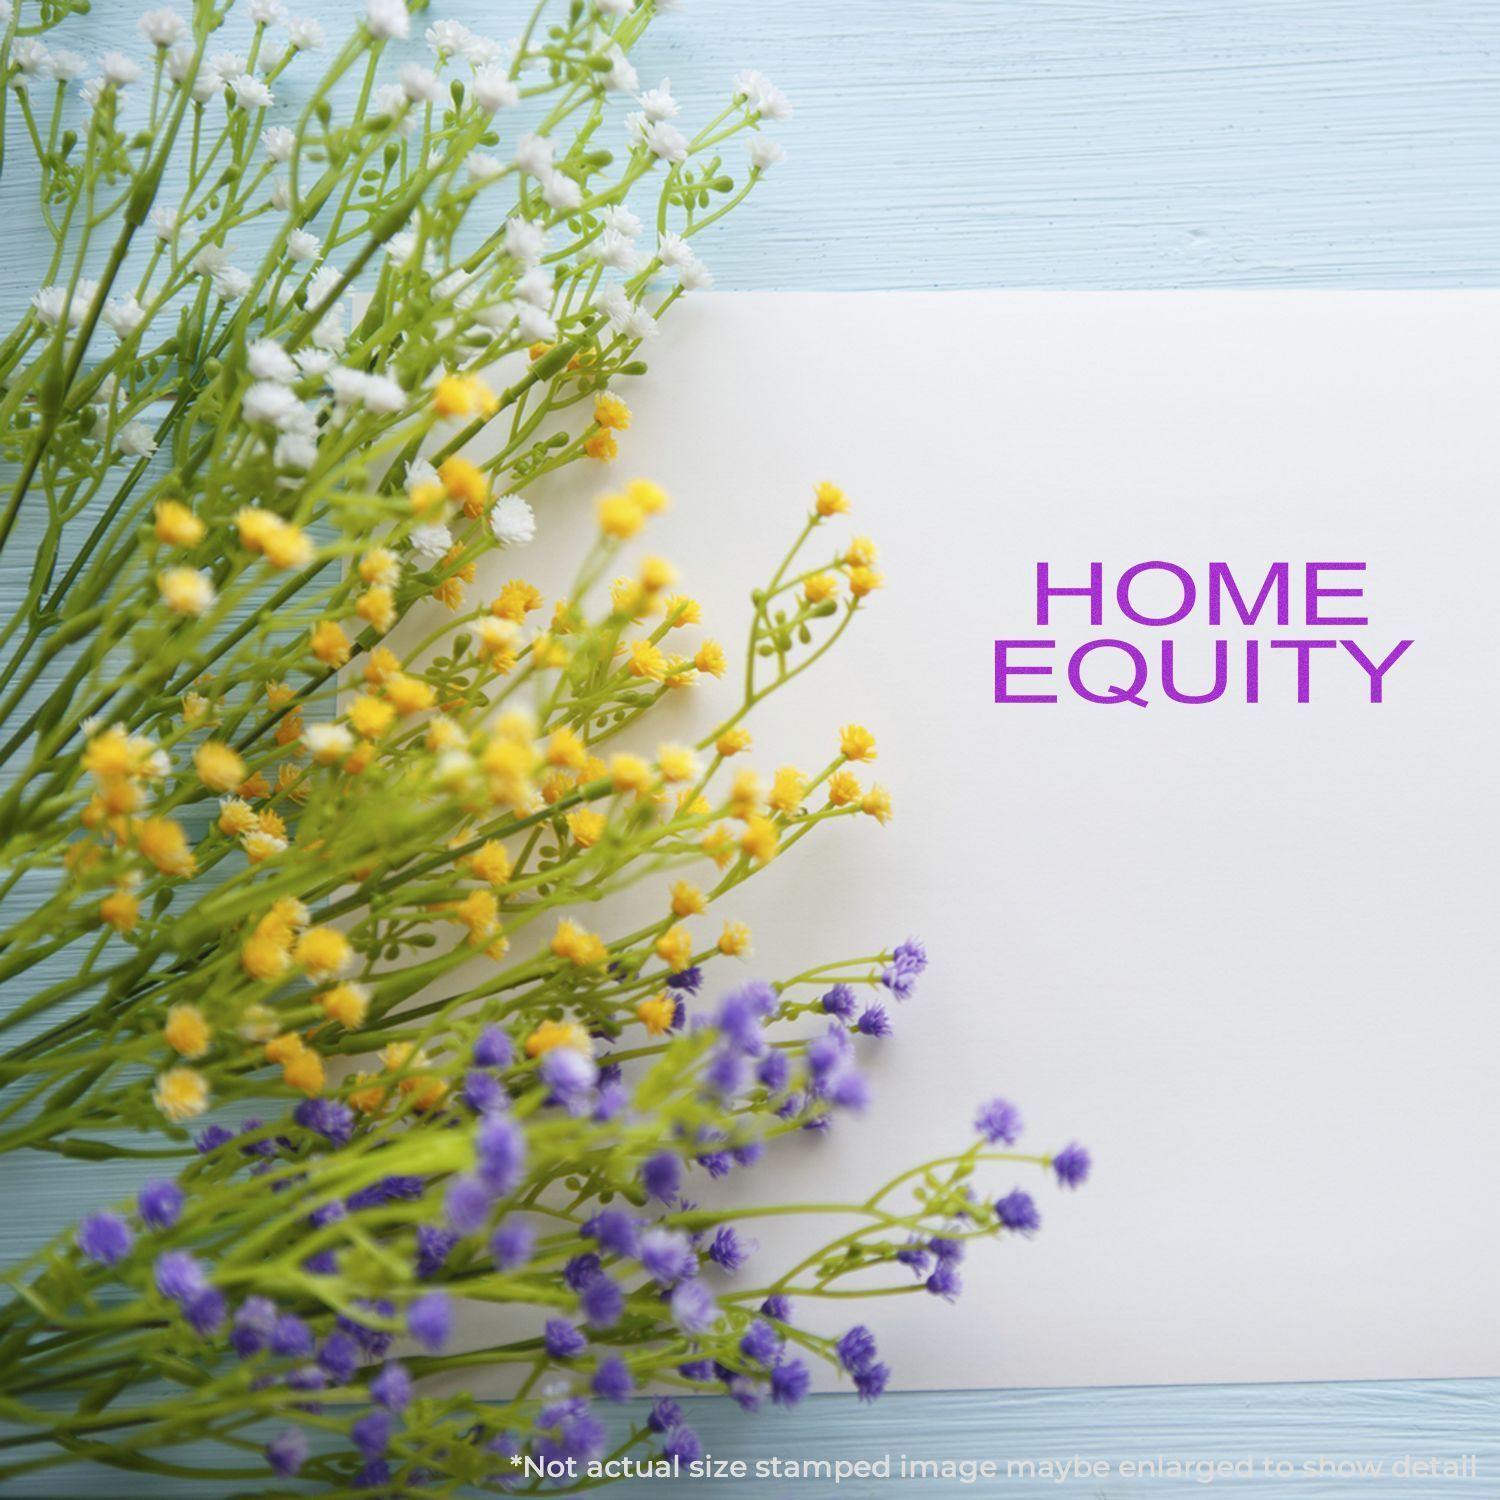 A self-inking stamp with a stamped image showing how the text "HOME EQUITY" is displayed after stamping.